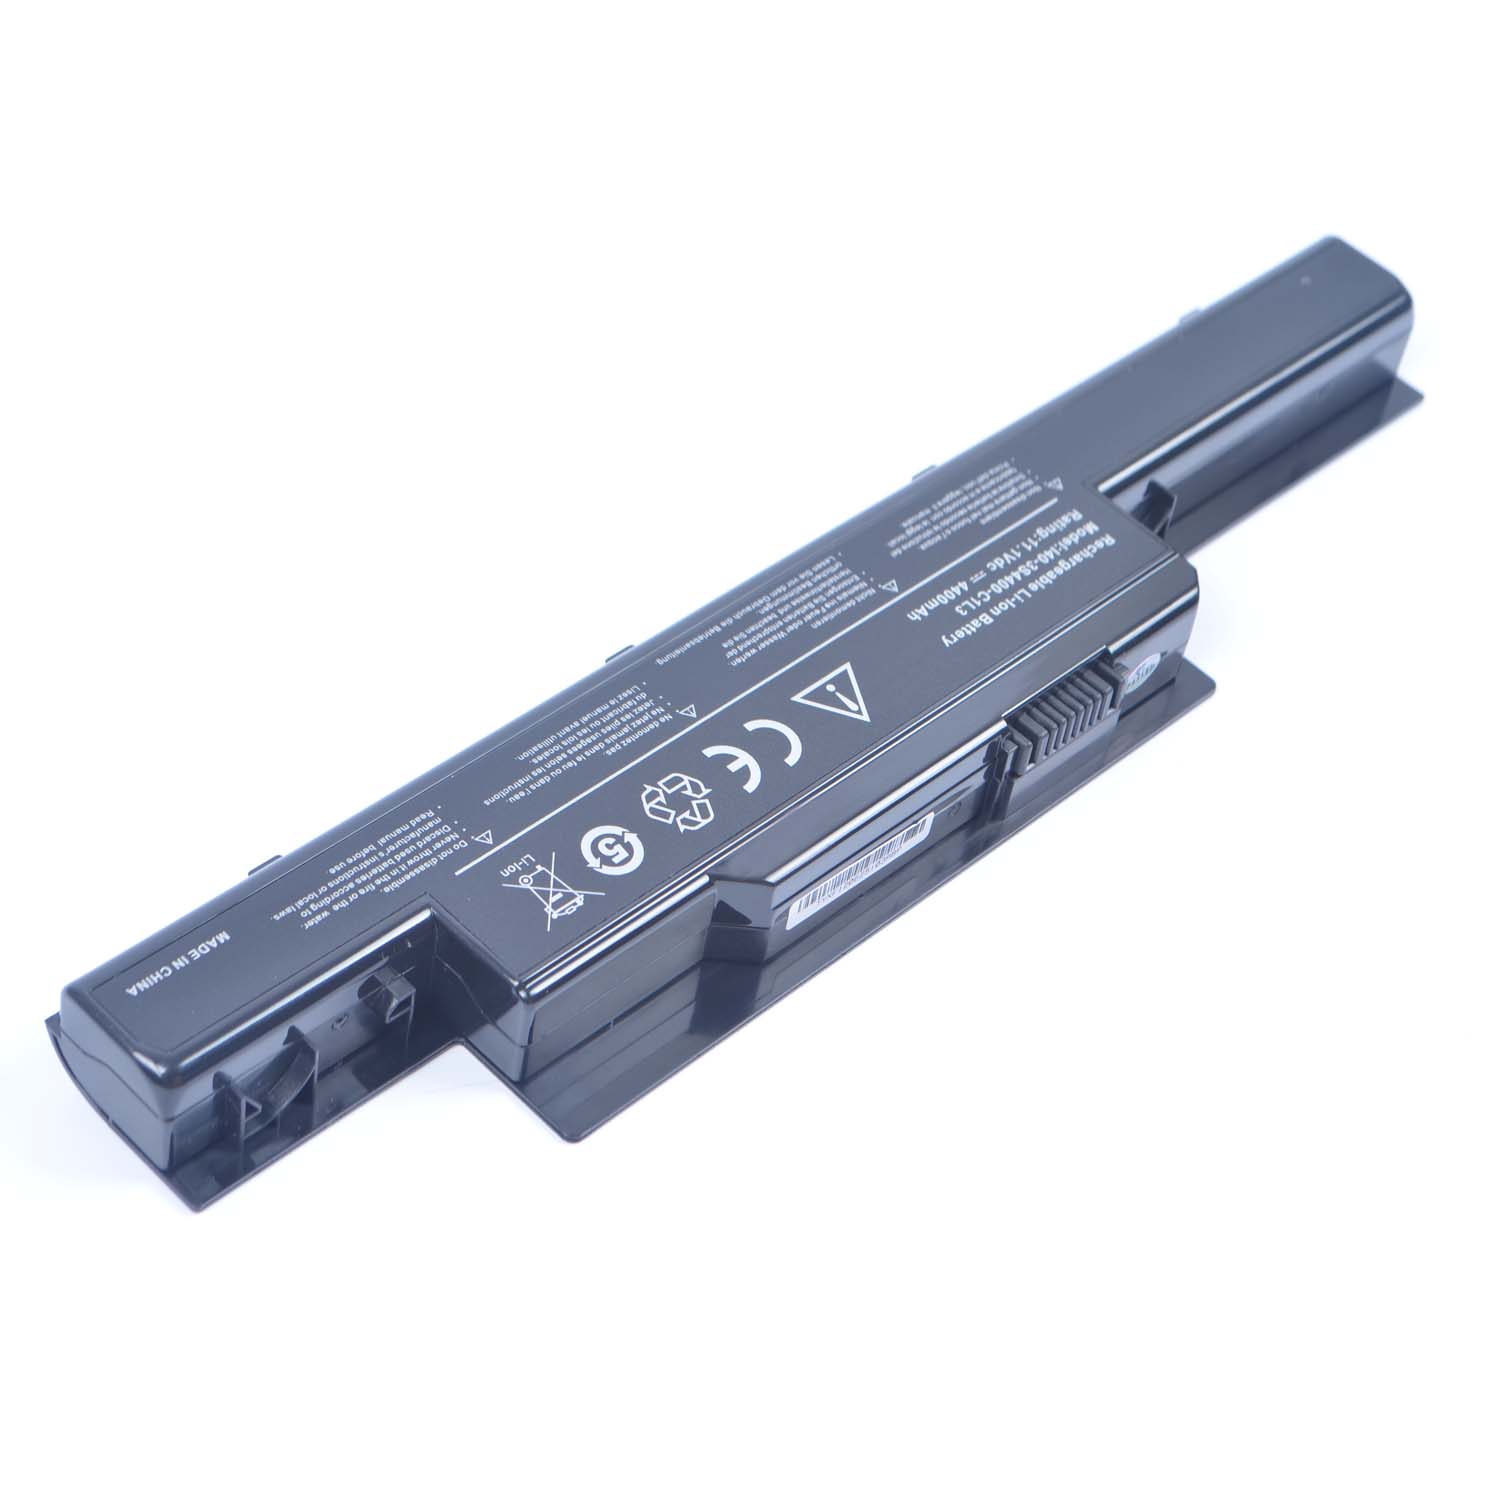 Replacement Battery for ADVENT I40-4S2600-C1L3 battery